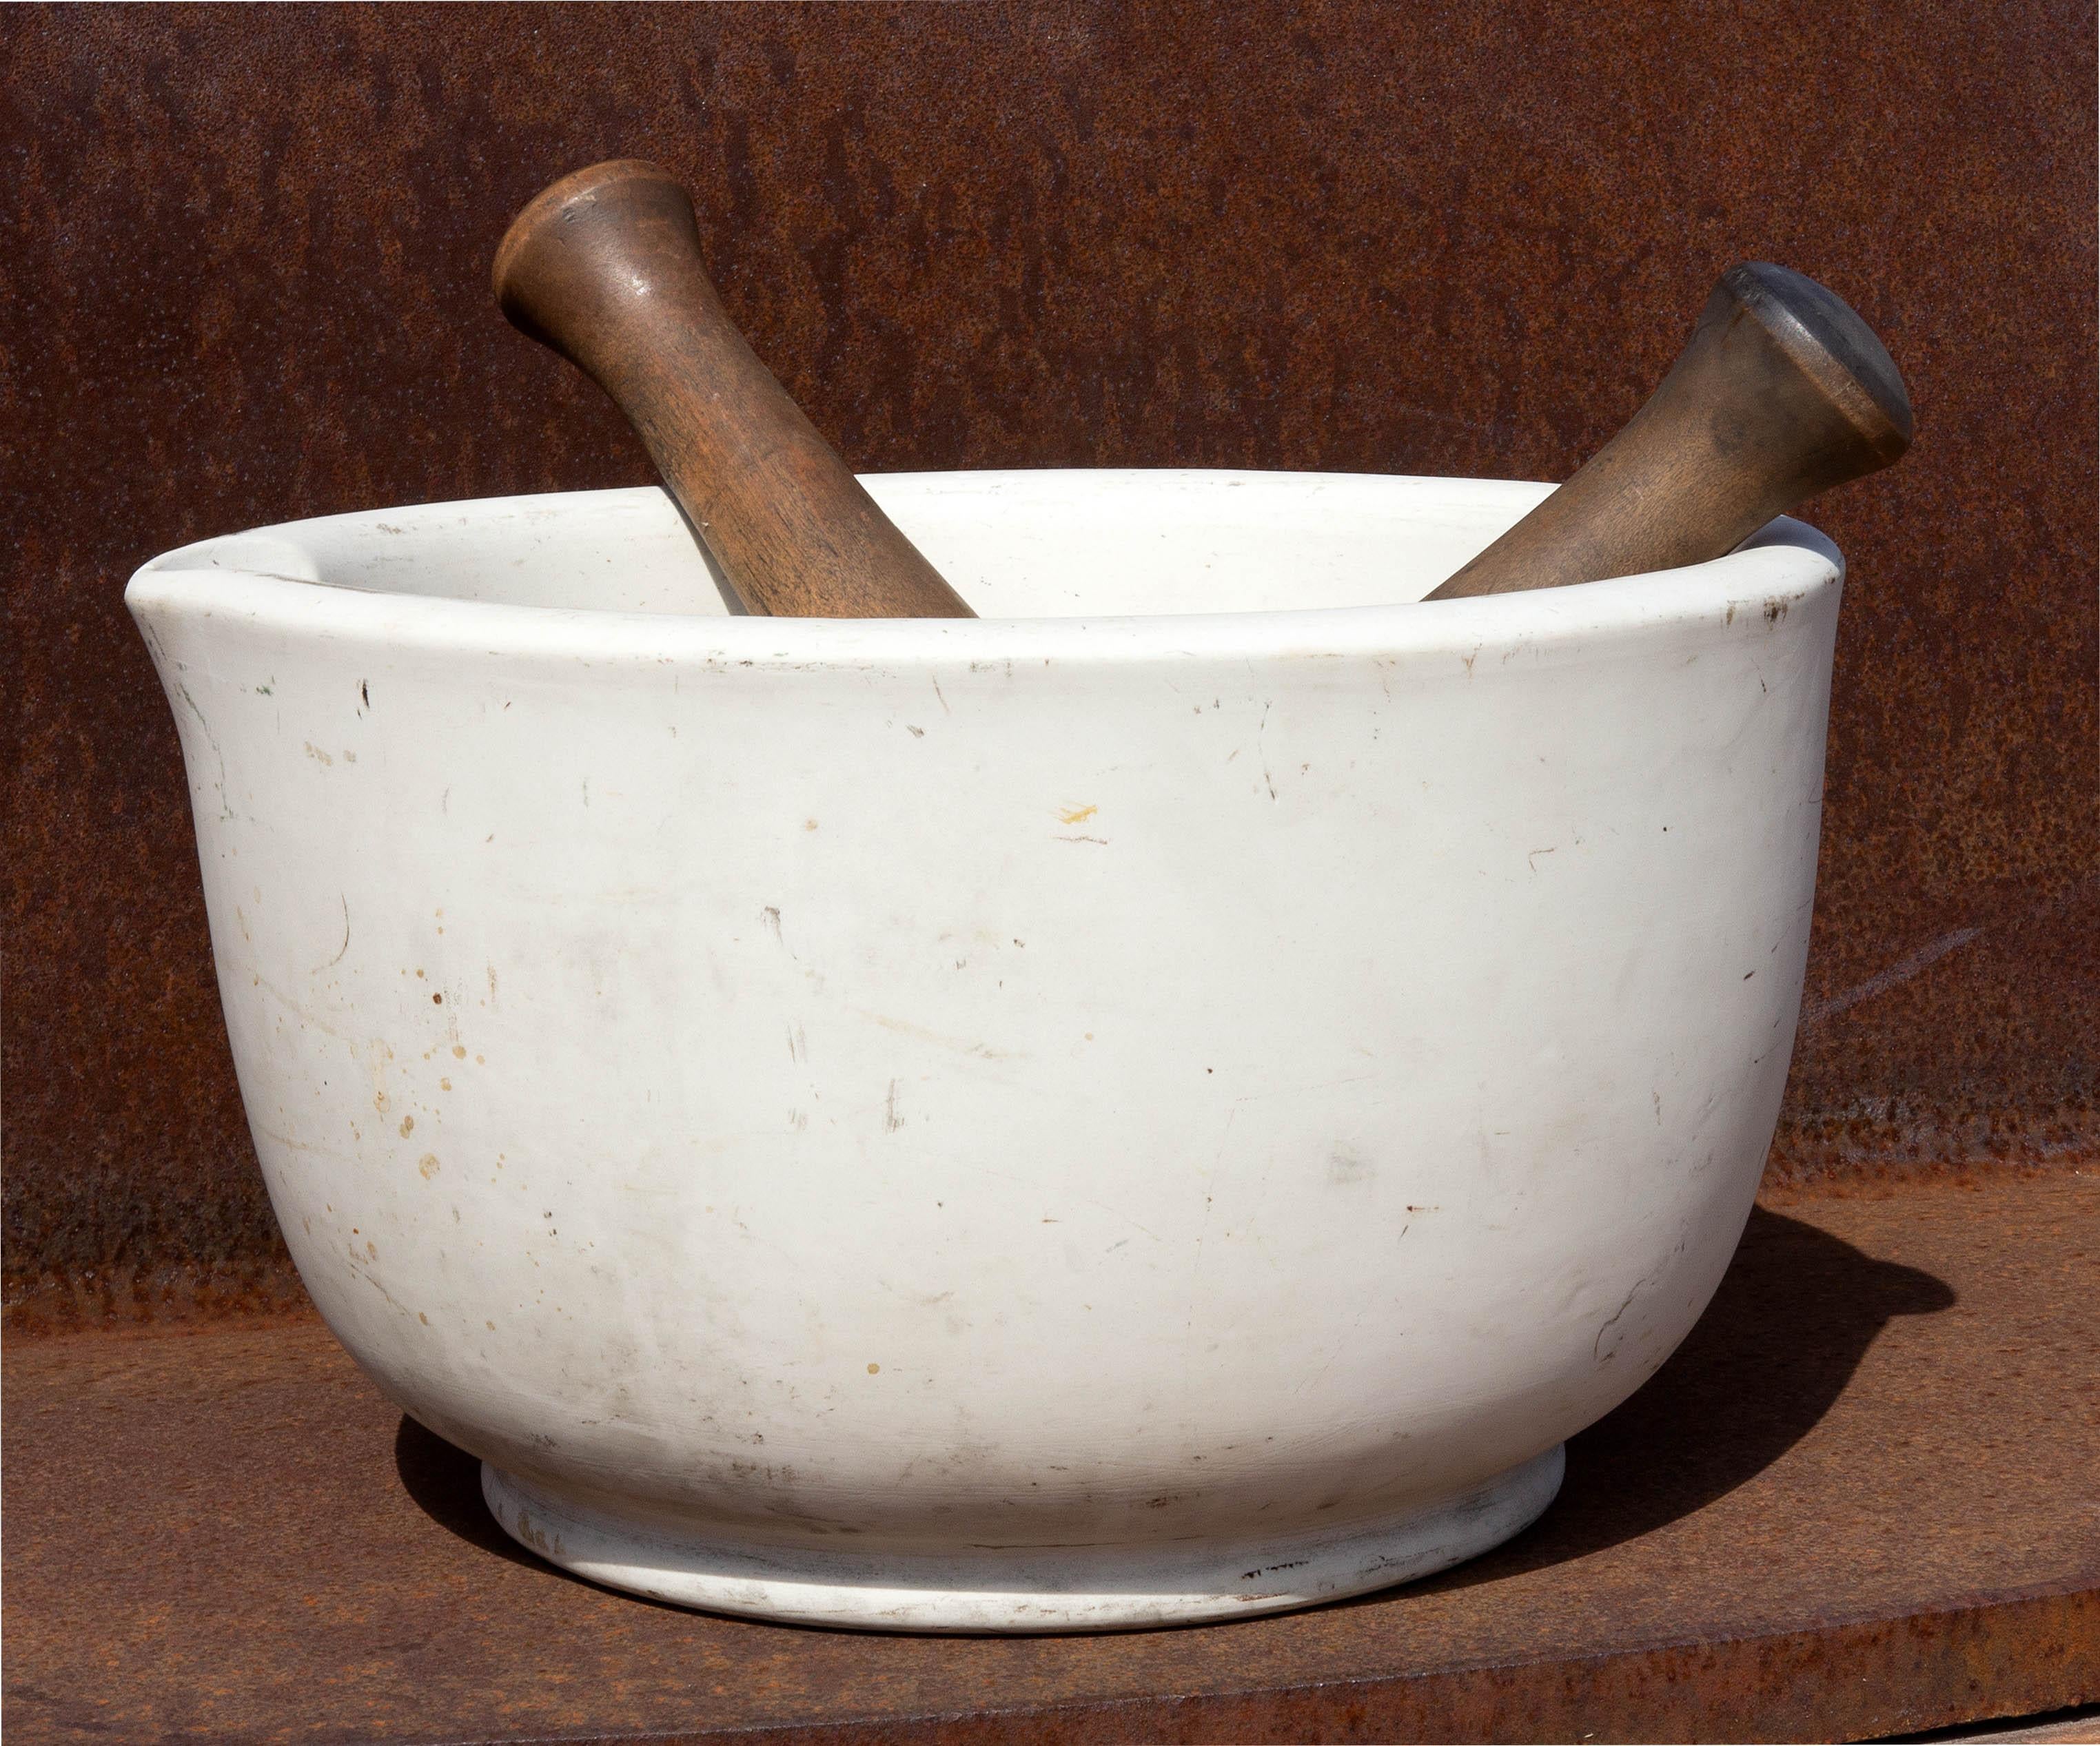 Mammoth porcelain mortar and pestle. Great for cooks or as an accent piece. . Heavy duty. Mortar weighs over 25 lbs. 14.75